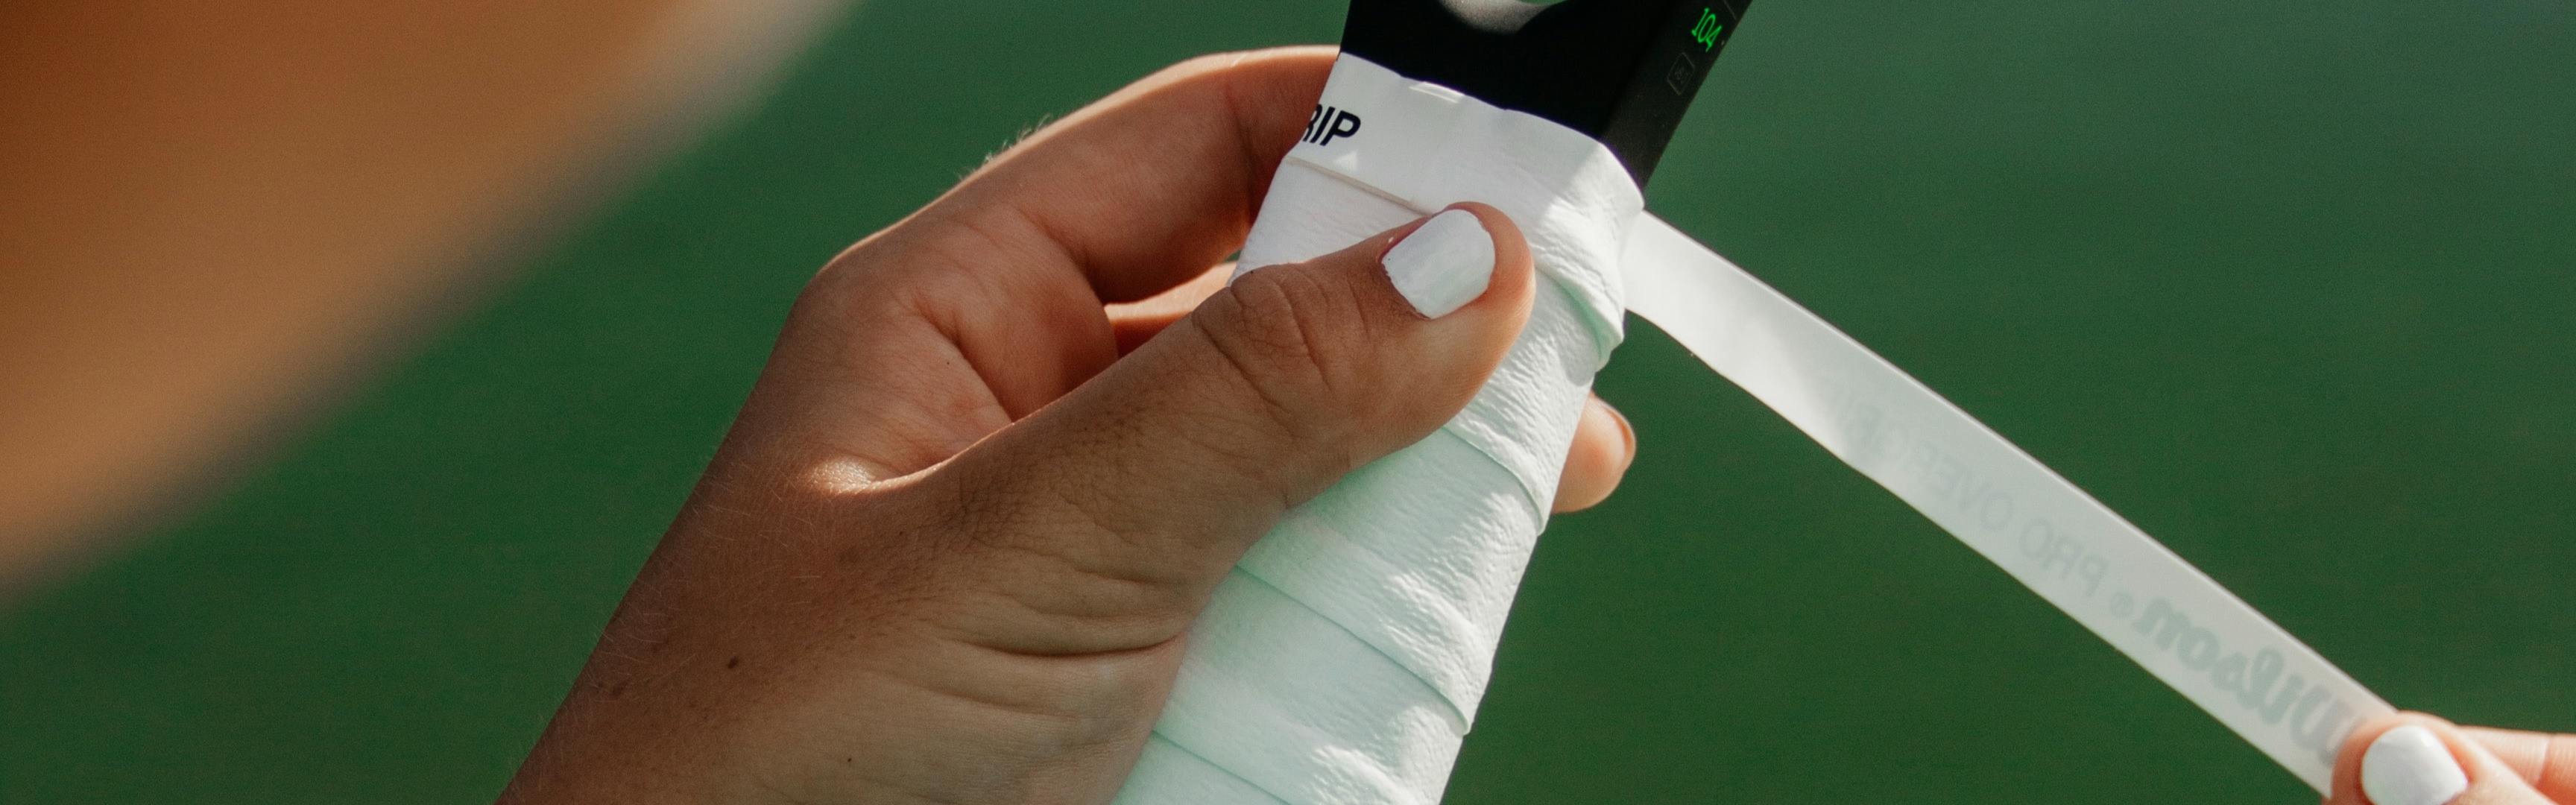 herir complicaciones Integrar Tennis Racket Grip: How to Hold for Your Racket | Curated.com